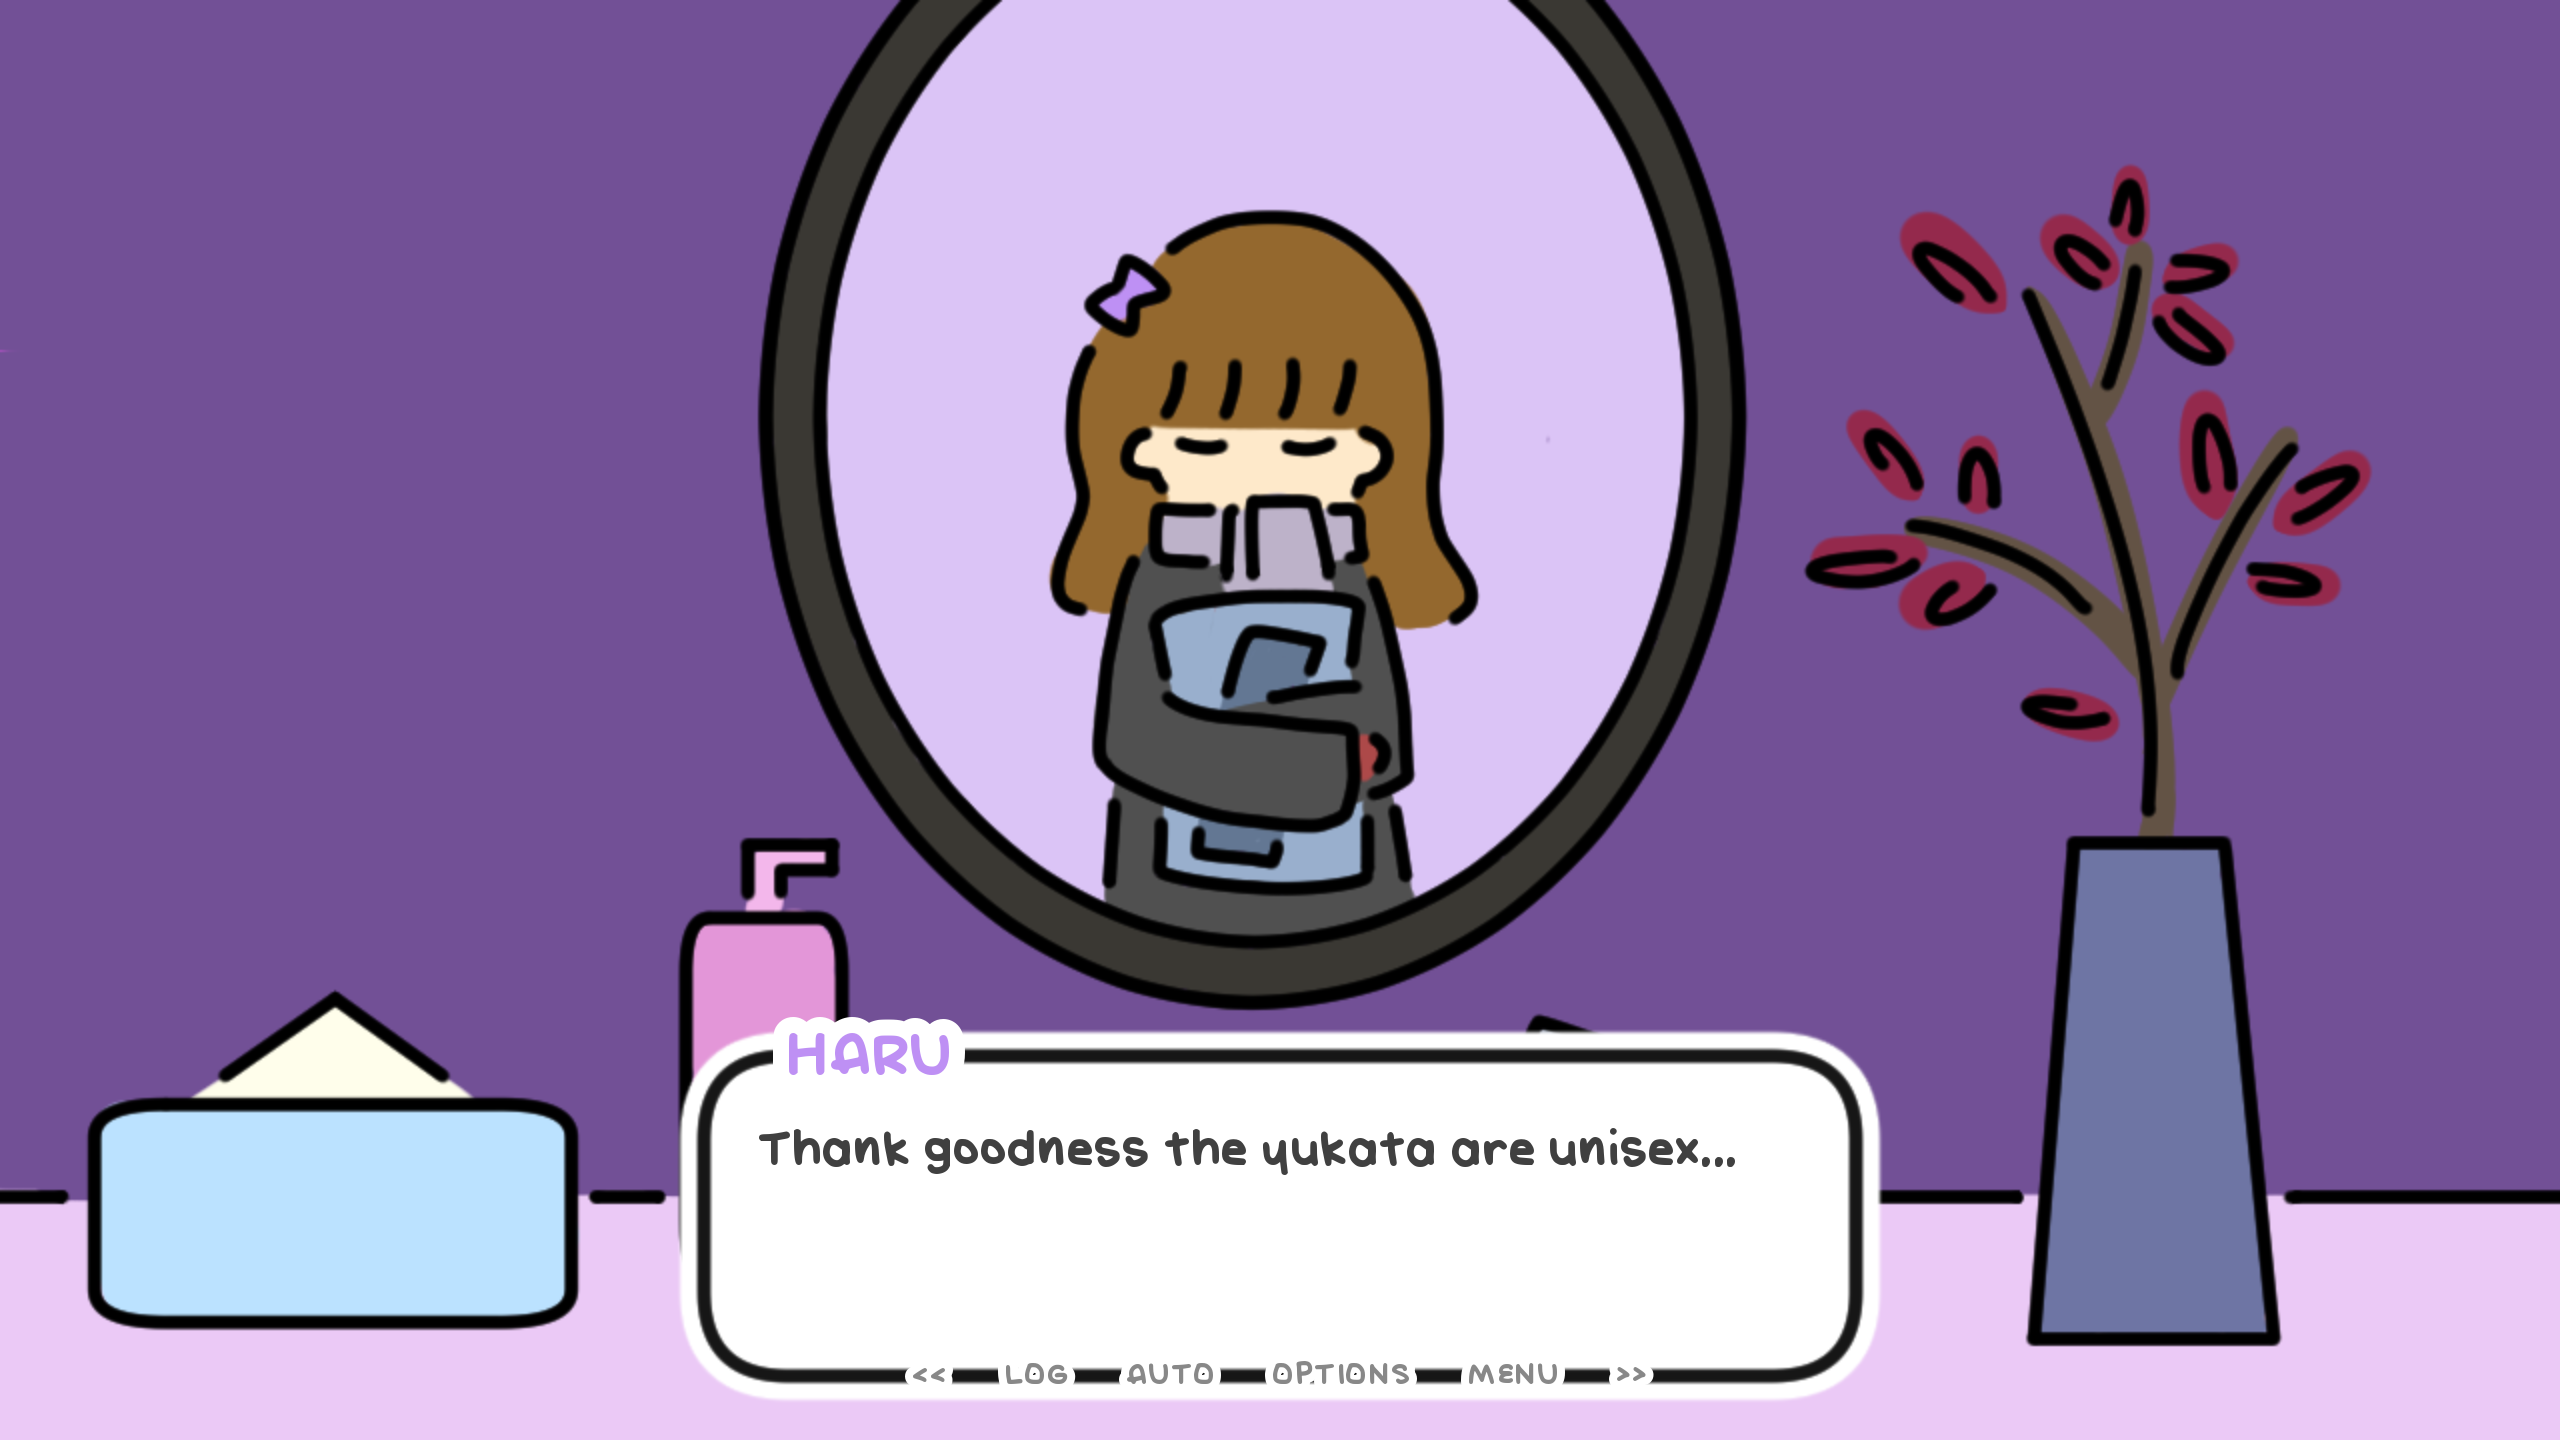 A feminine figure looks at herself in the mirror and says, 'Thank goodness the yukata are unisex...'